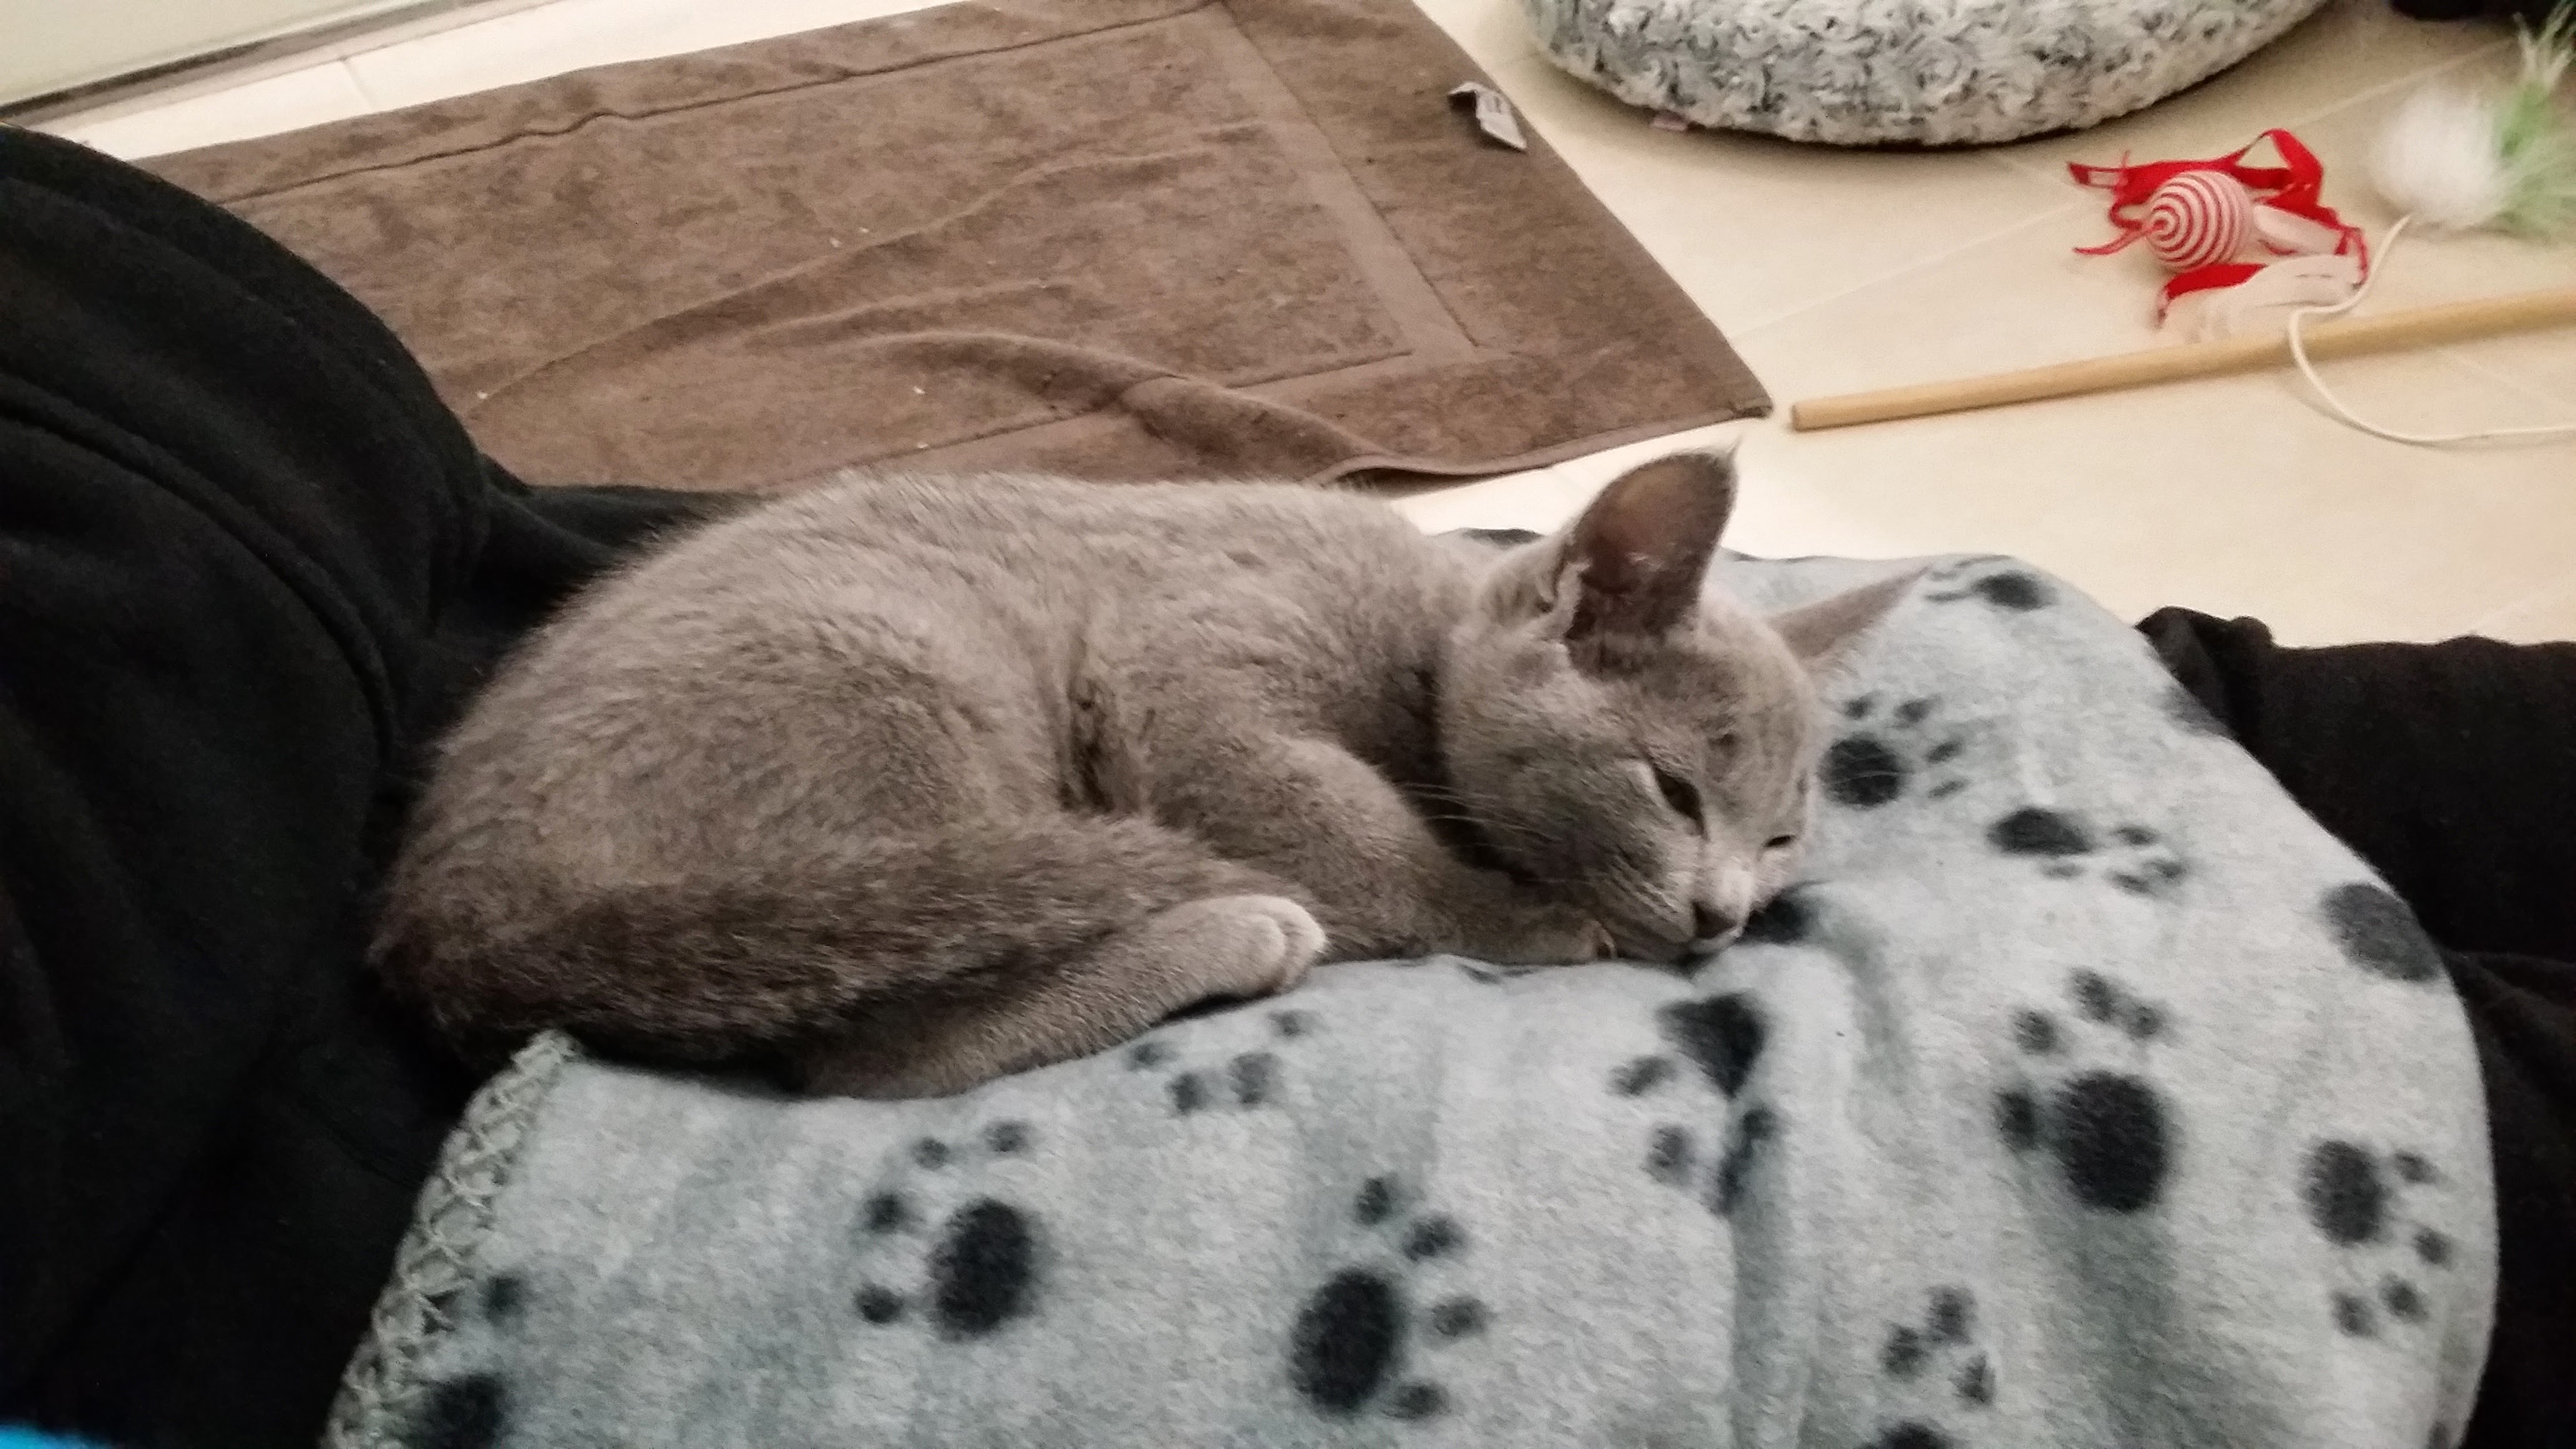 A very small, 8 week old Arya dozing off on a small grey pet blanket with little black paw prints on it